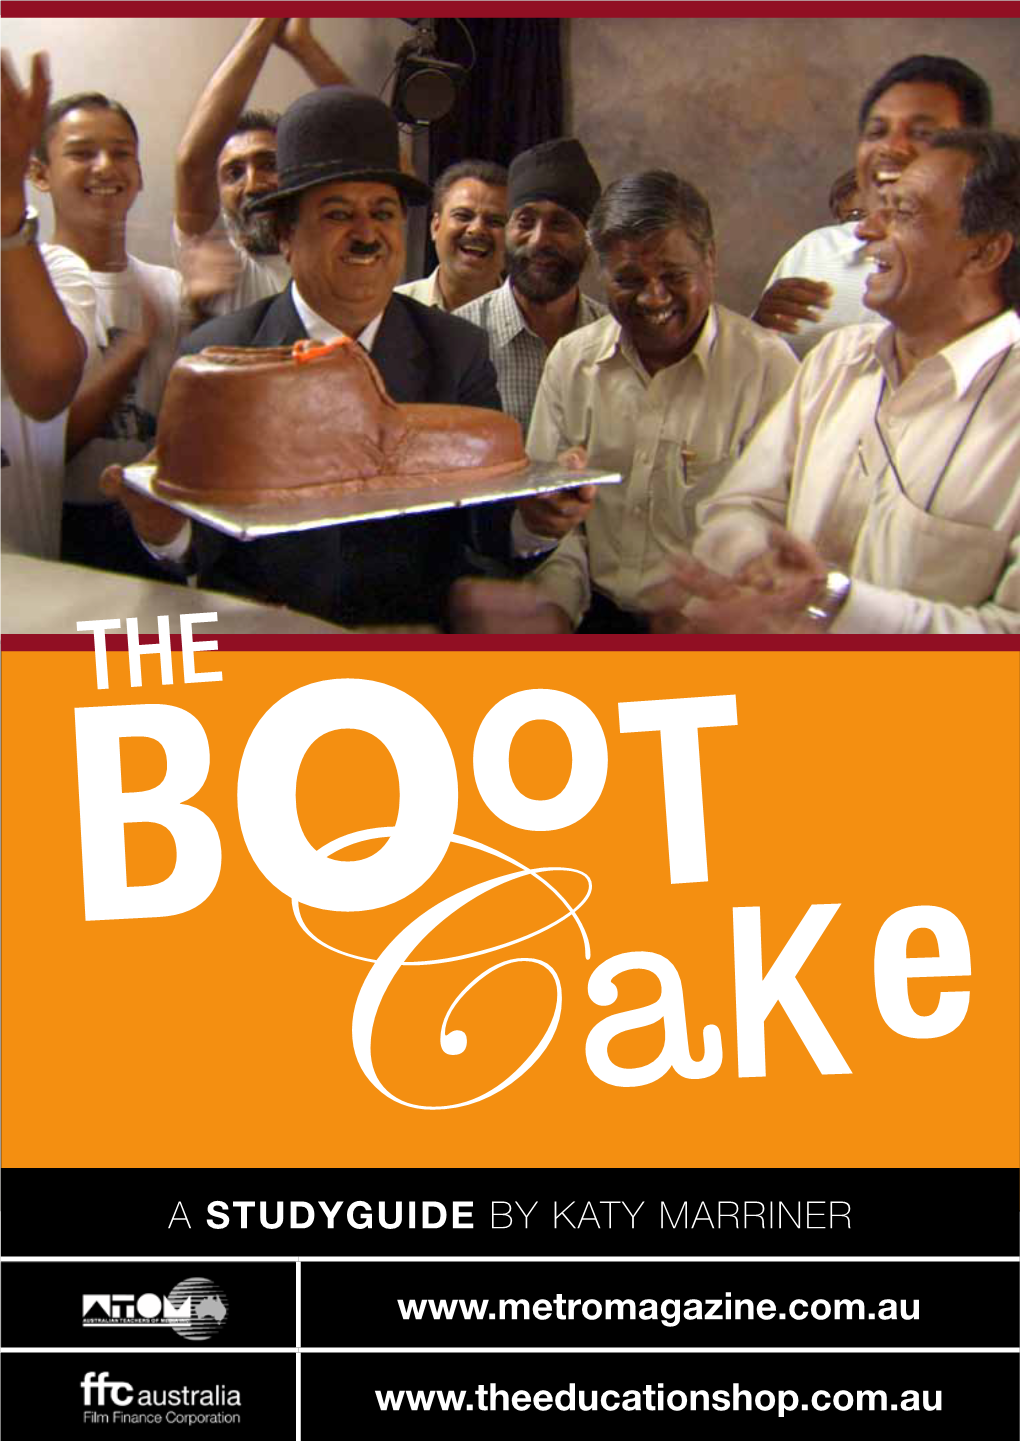 To Download the BOOT CAKE Study Guide